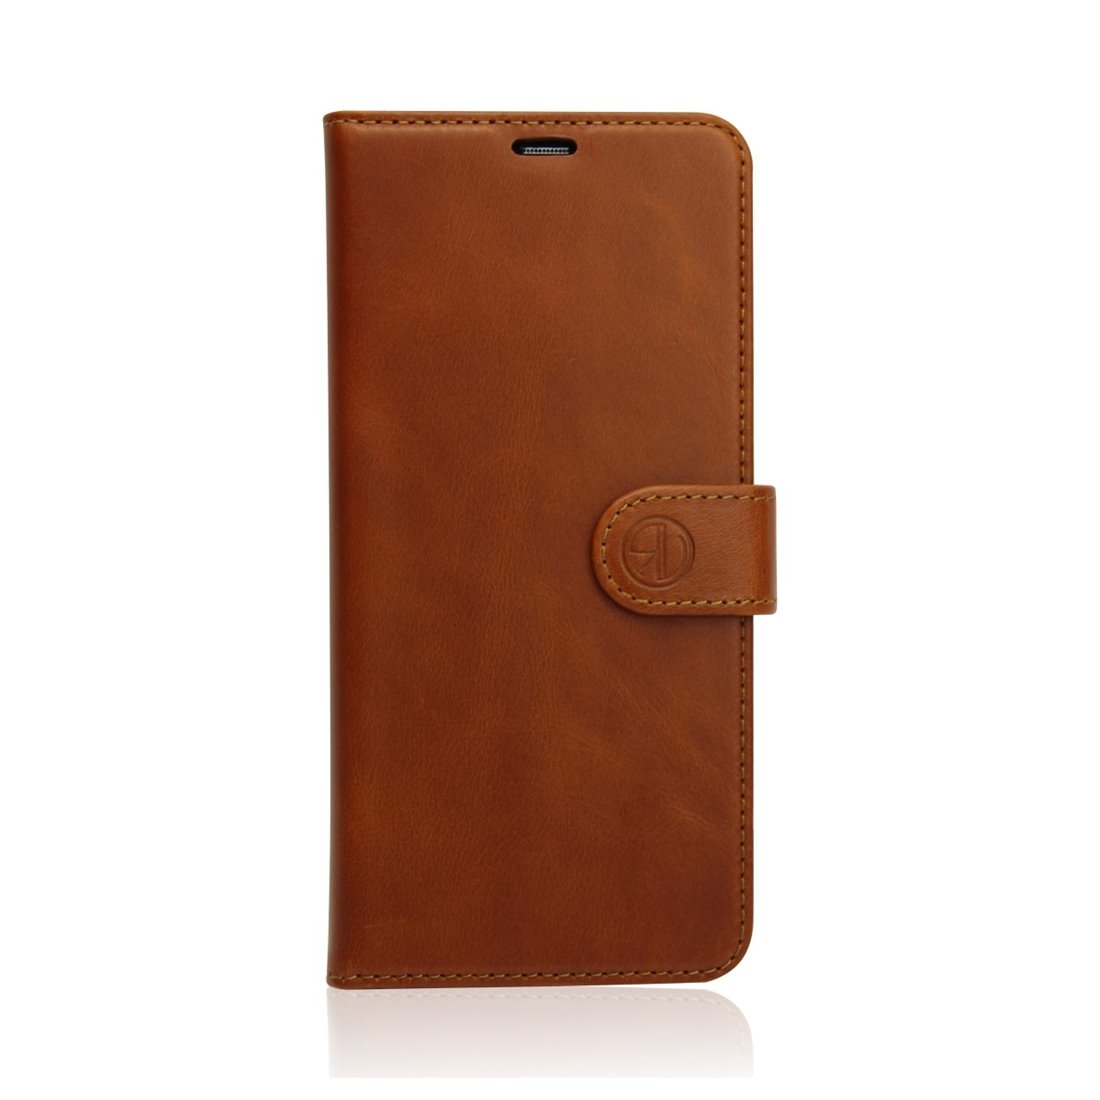 Genuine Leather Book Case iPhone 6/6S Plus light brown